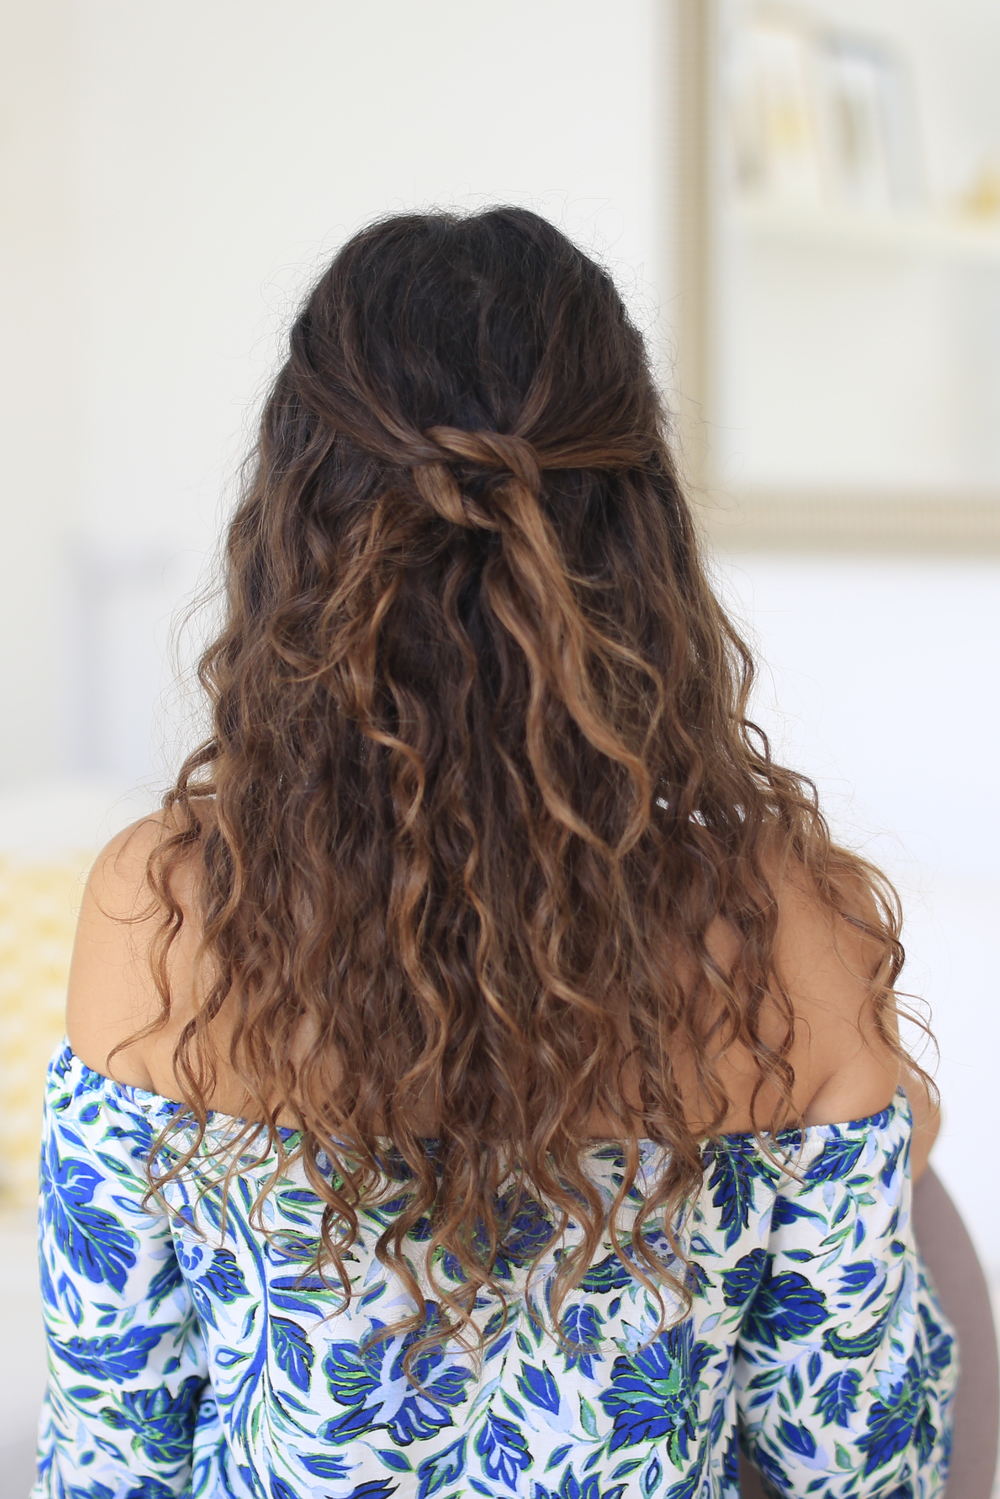 3 easy hairstyles for curly hair | Gallery posted by Tara Marie | Lemon8